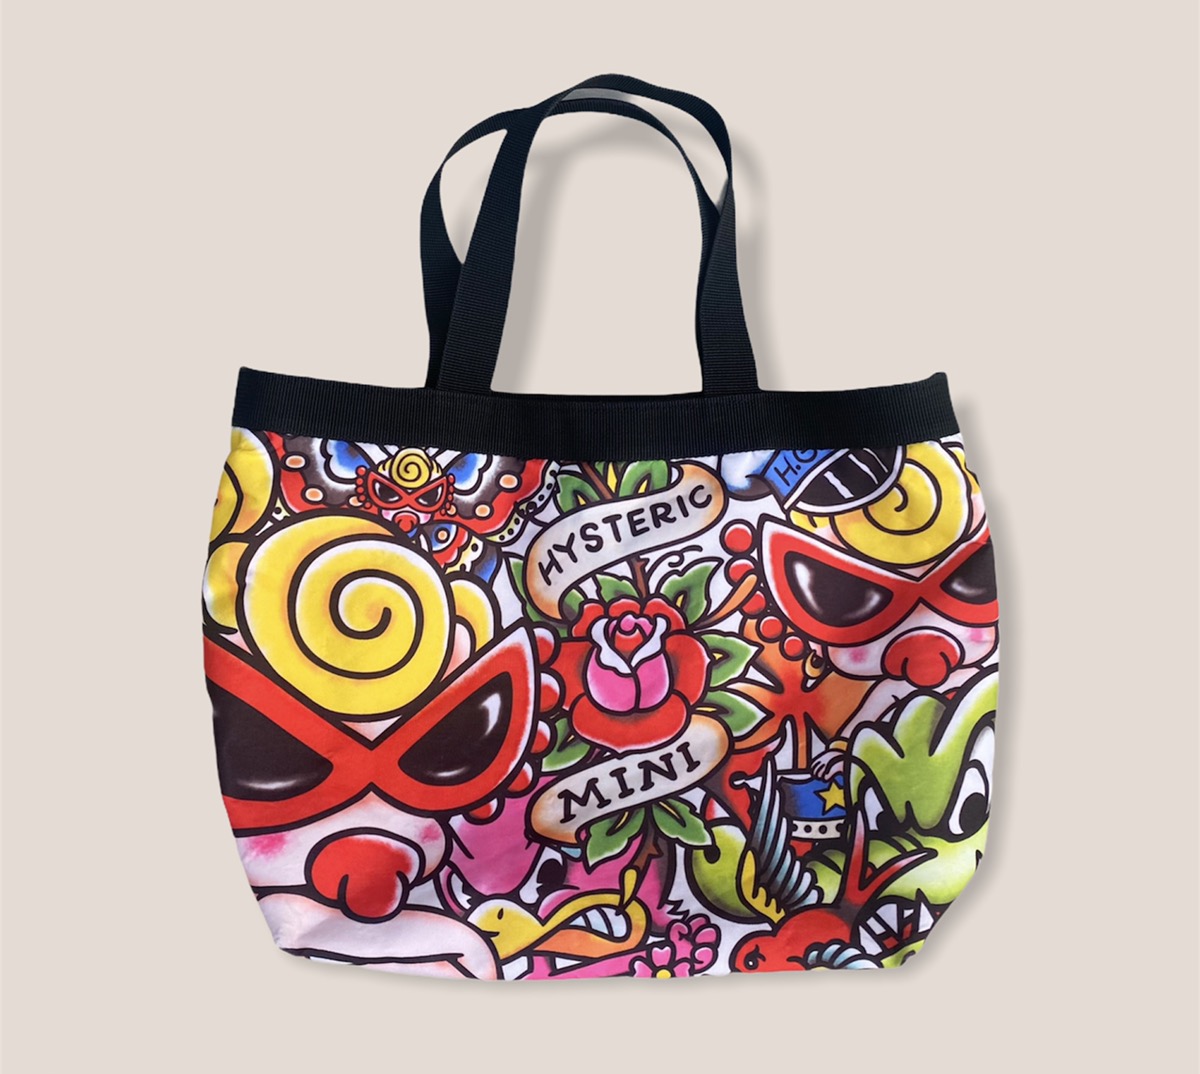 HYSTERIC FULLY MOTIVATED MINI TOTE BAG TWO-WAY FEATURES